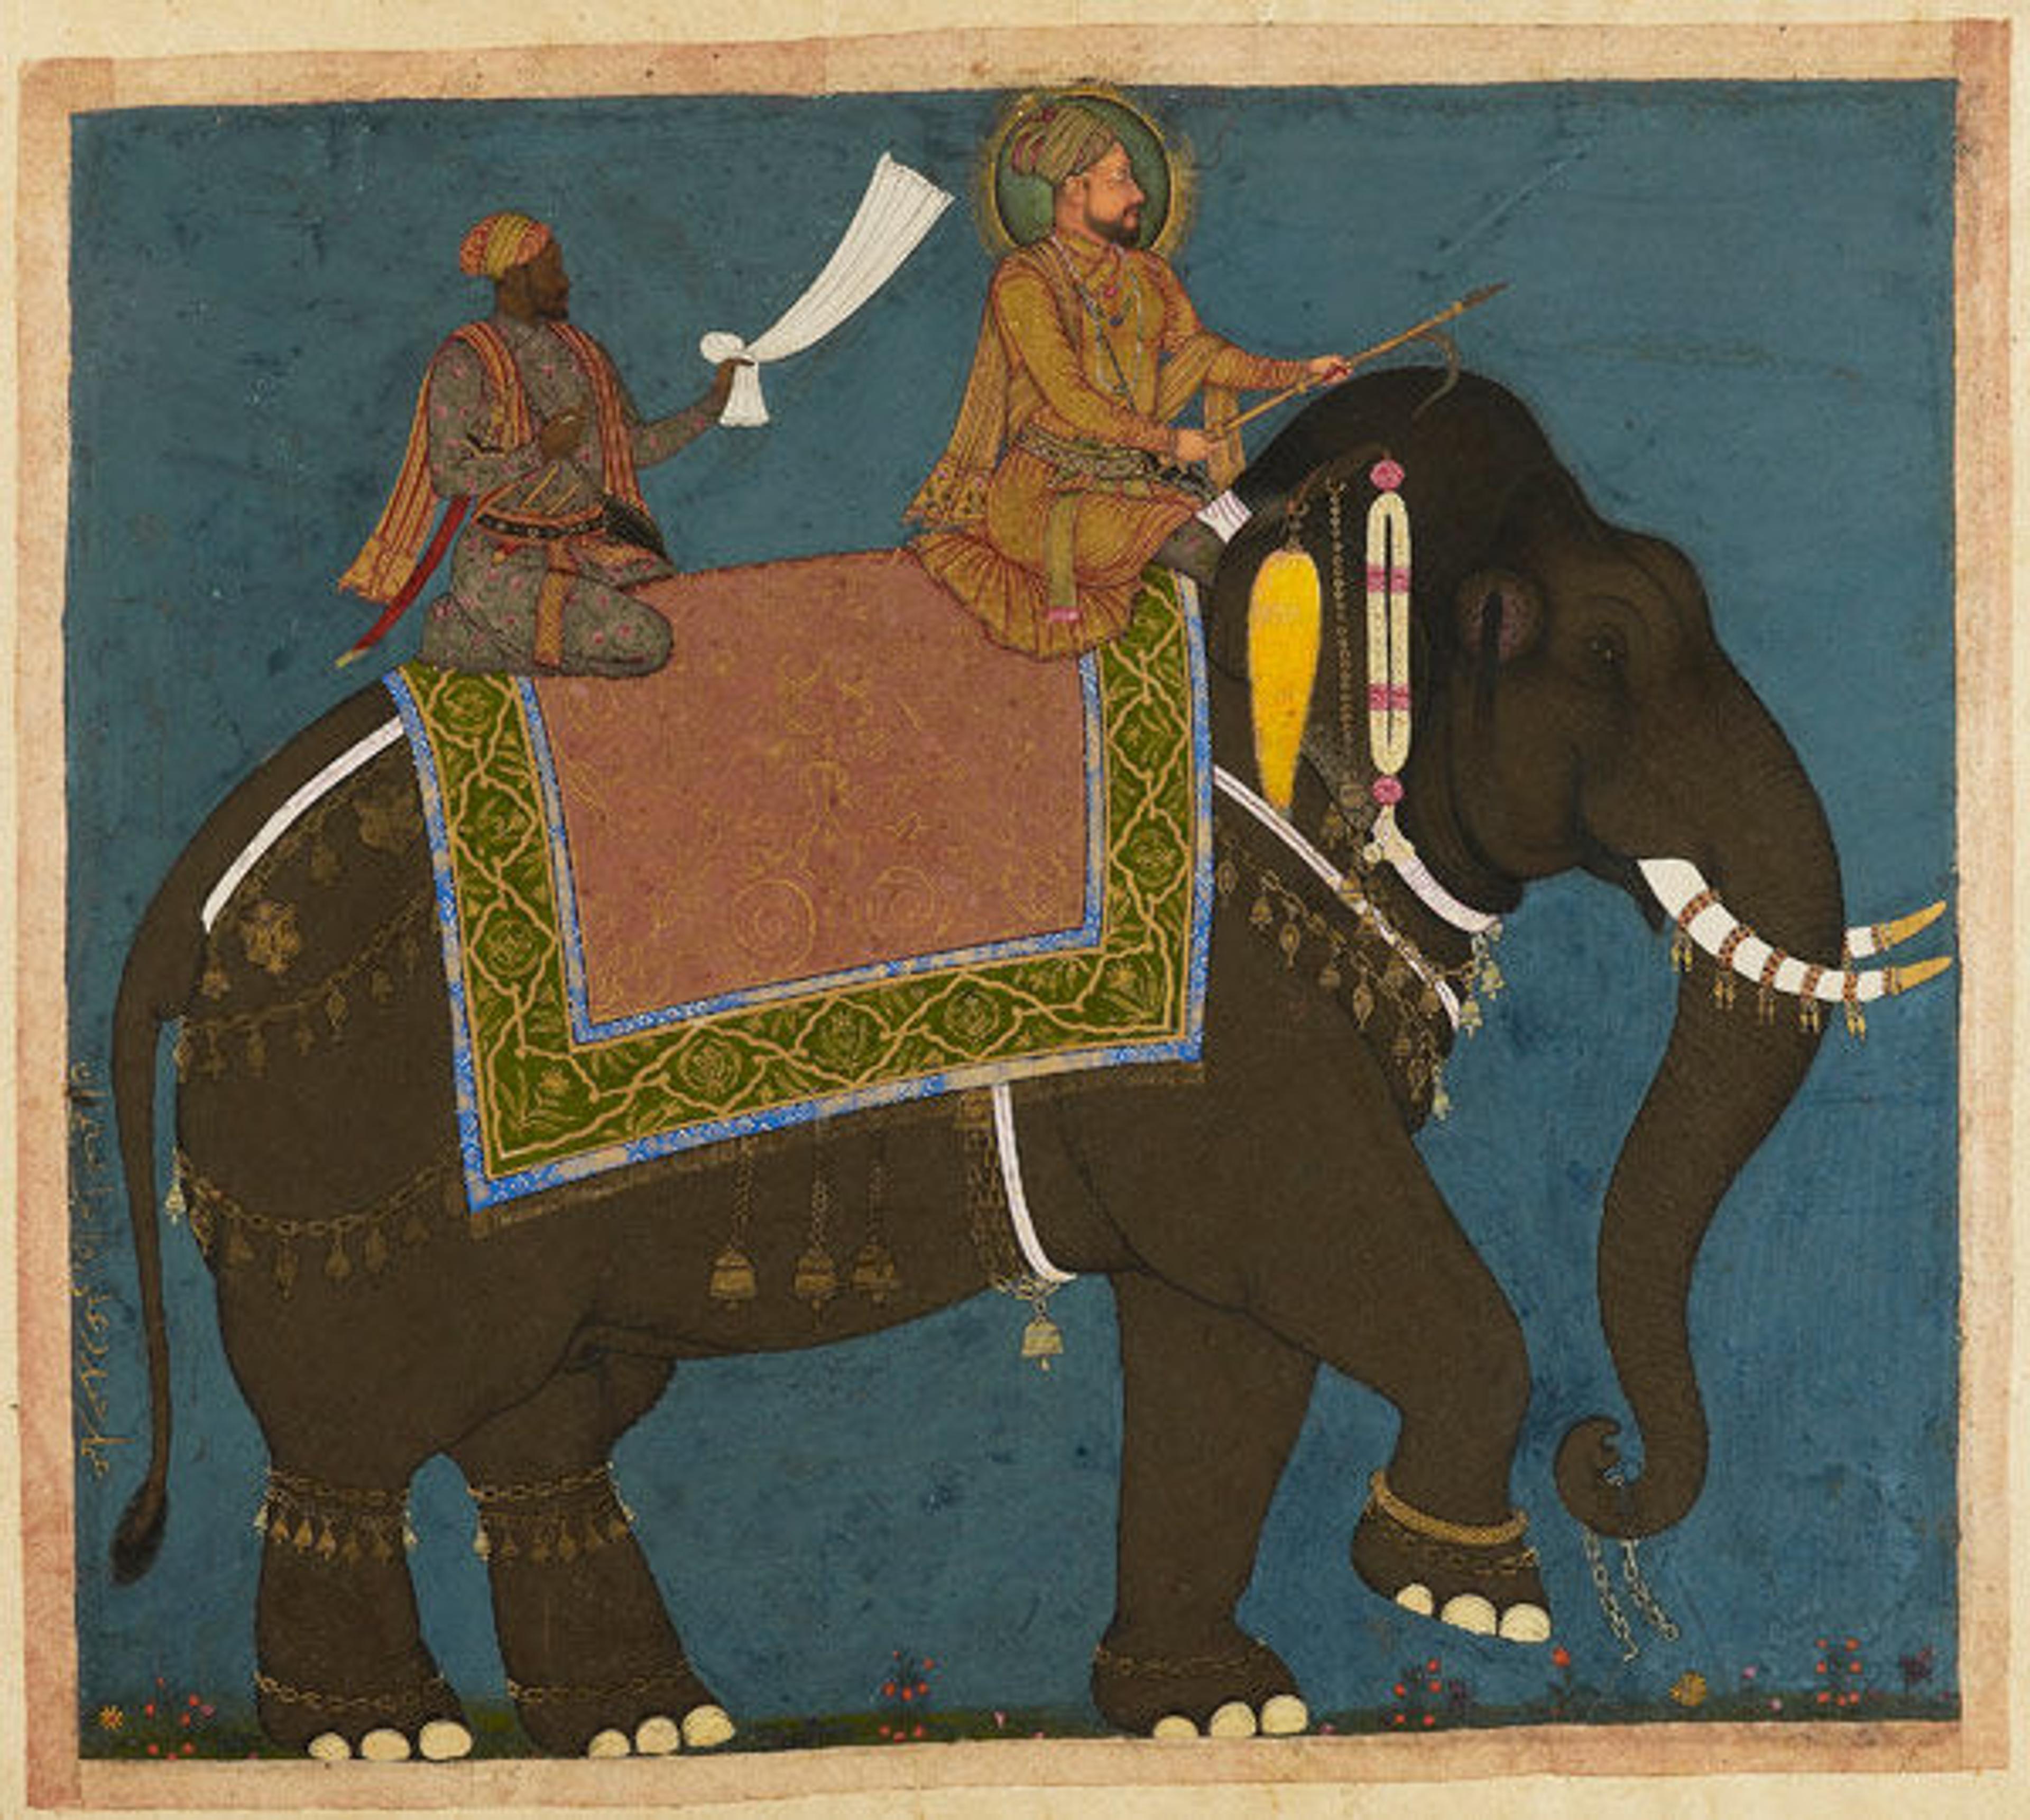 Sultan Muhammad 'Adil Shah and Ikhlas Khan Riding an Elephant, (detail) ca. 1645. India, Deccan, Bijapur. Ink, opaque watercolor, and gold on paper, The Ashmolean Museum, Oxford. Lent by Howard Hodgkin